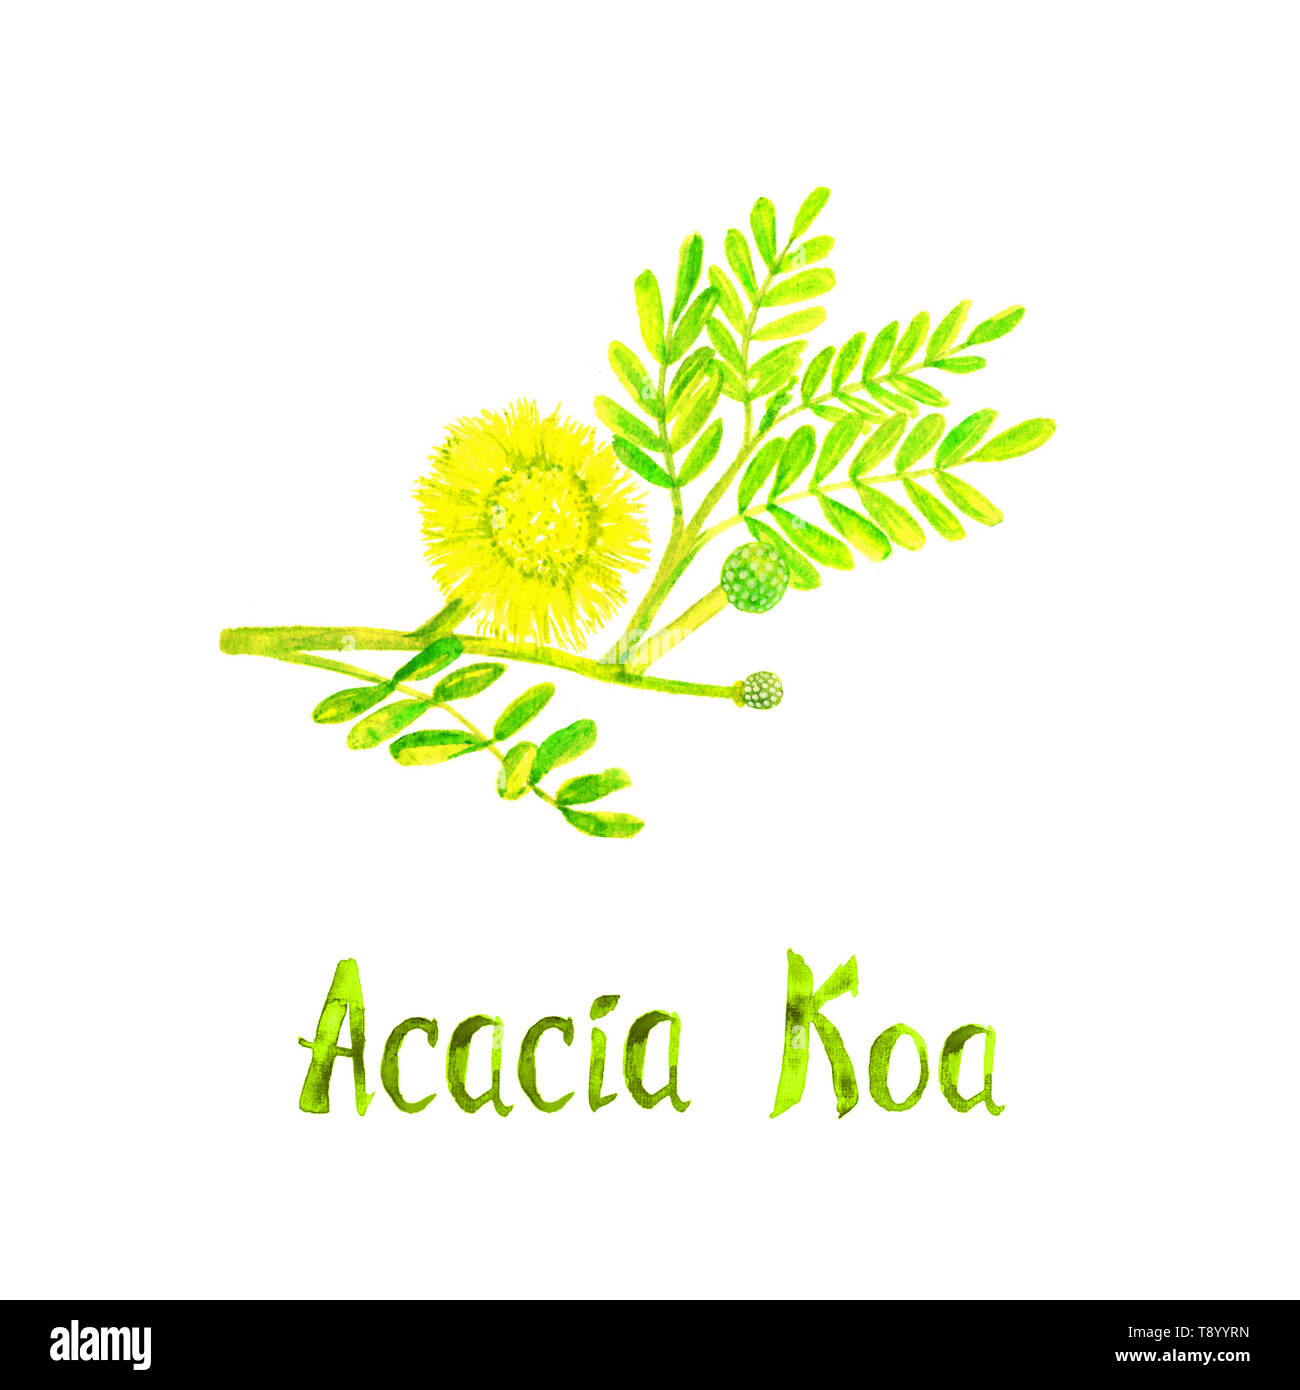 Acacia Koa branch with green leaves and yellow flower, hand painted watercolor illustration with inscription isolated on white Stock Photo